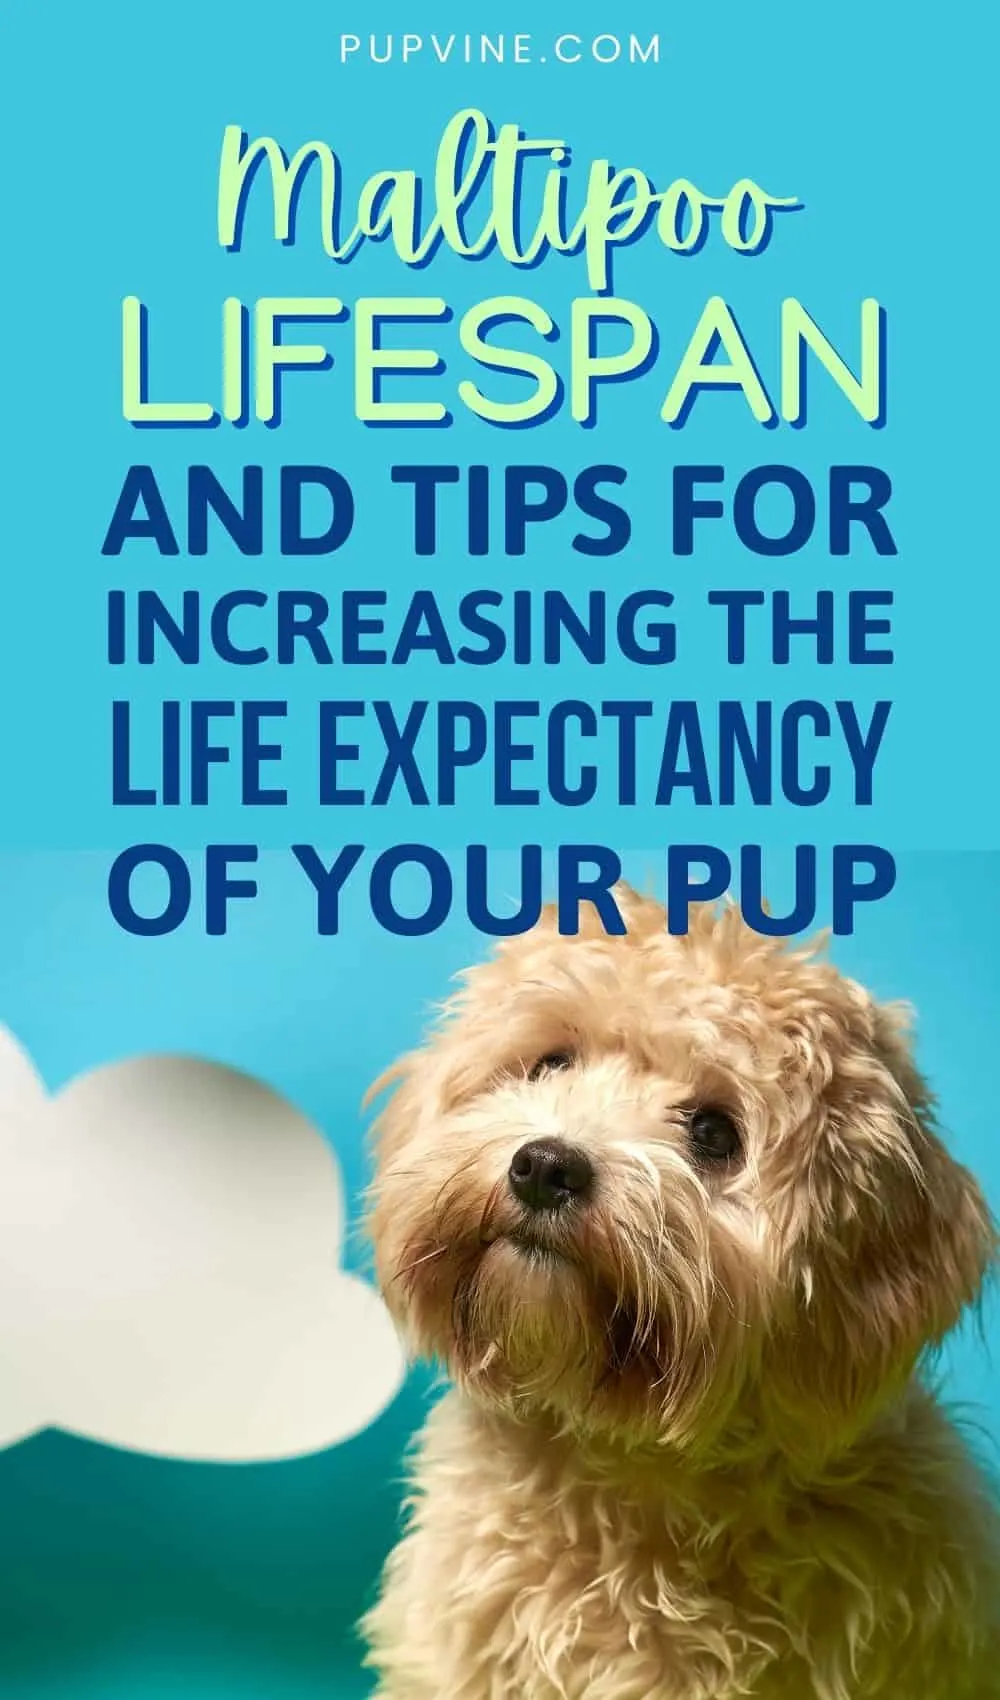 Maltipoo Lifespan And Tips For Increasing The Life Expectancy Of Your Pup